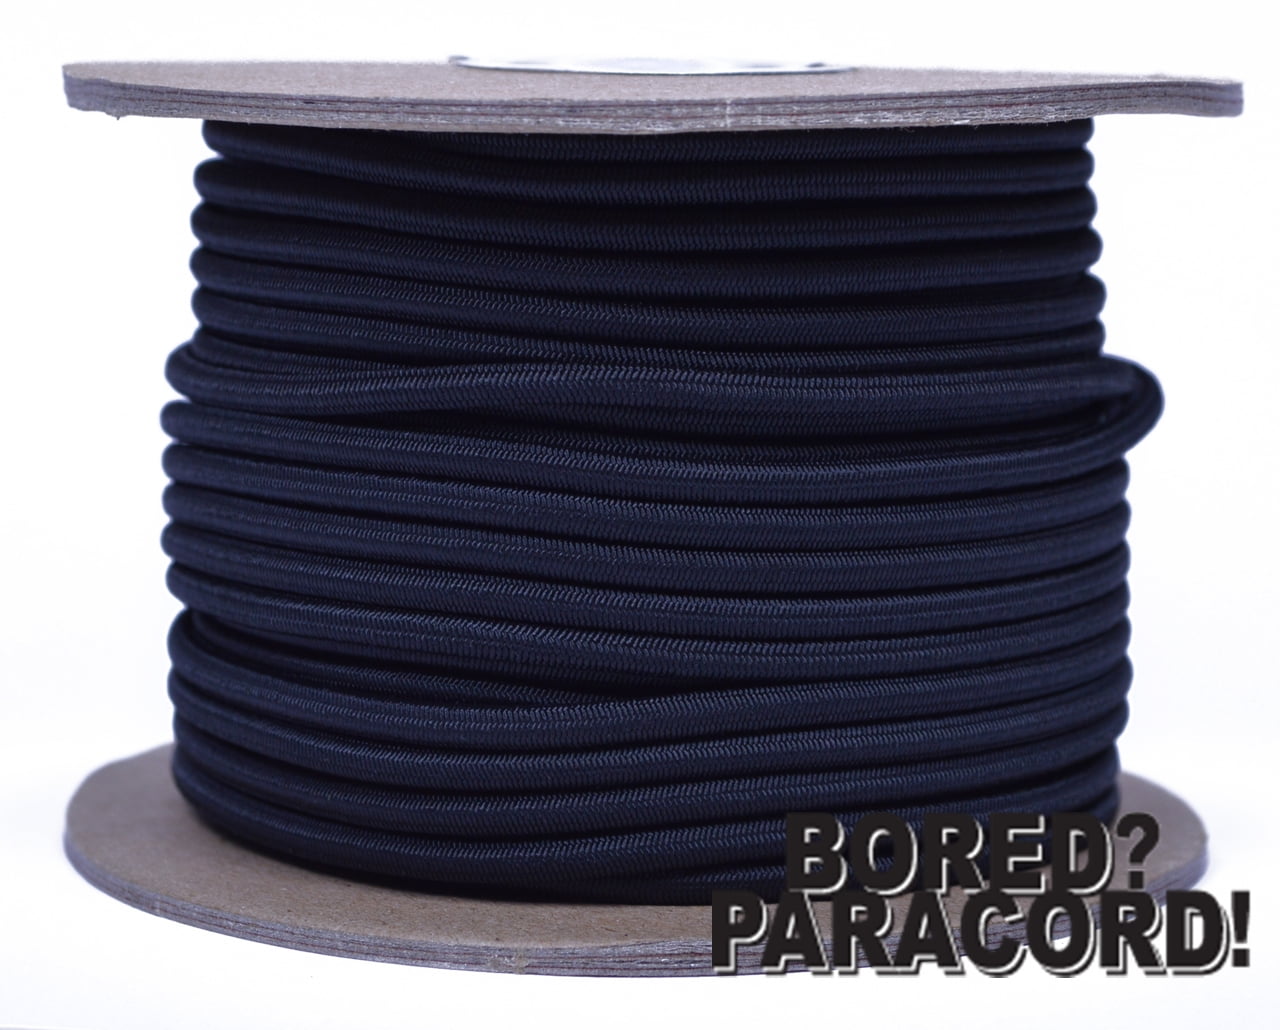 Elastic Cord 1/32" Diameter Bungee Stretch String Shock Cord up to 1000 FT 